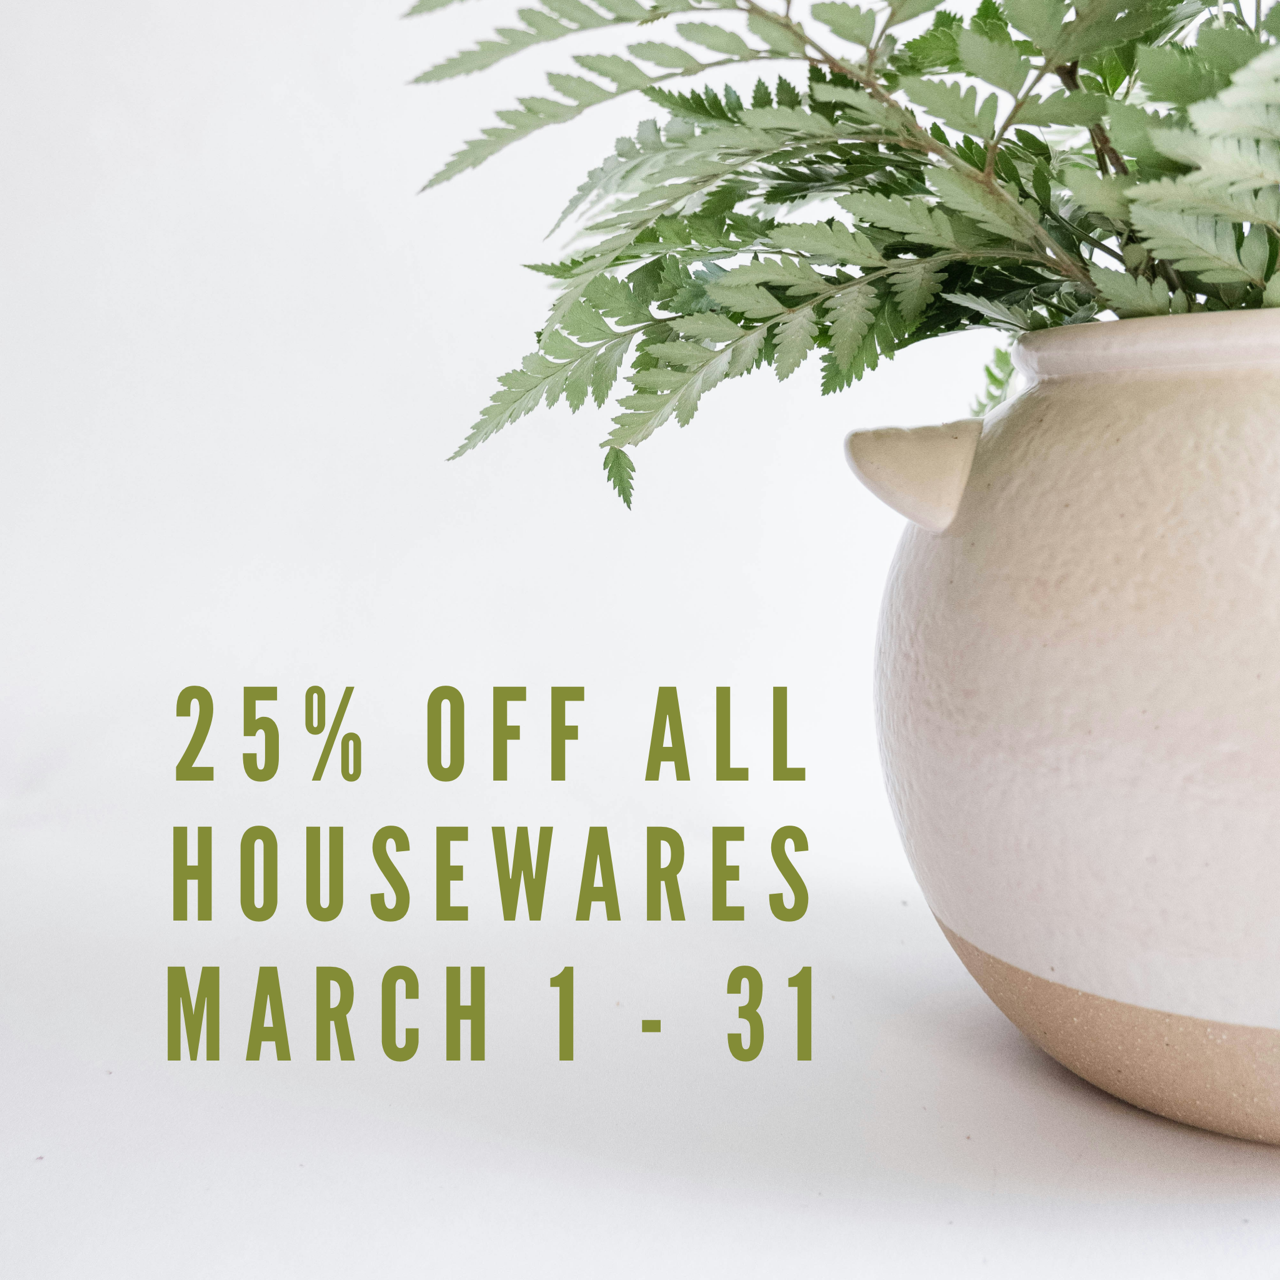 Save 25% off all Housewares March 1st - 31st